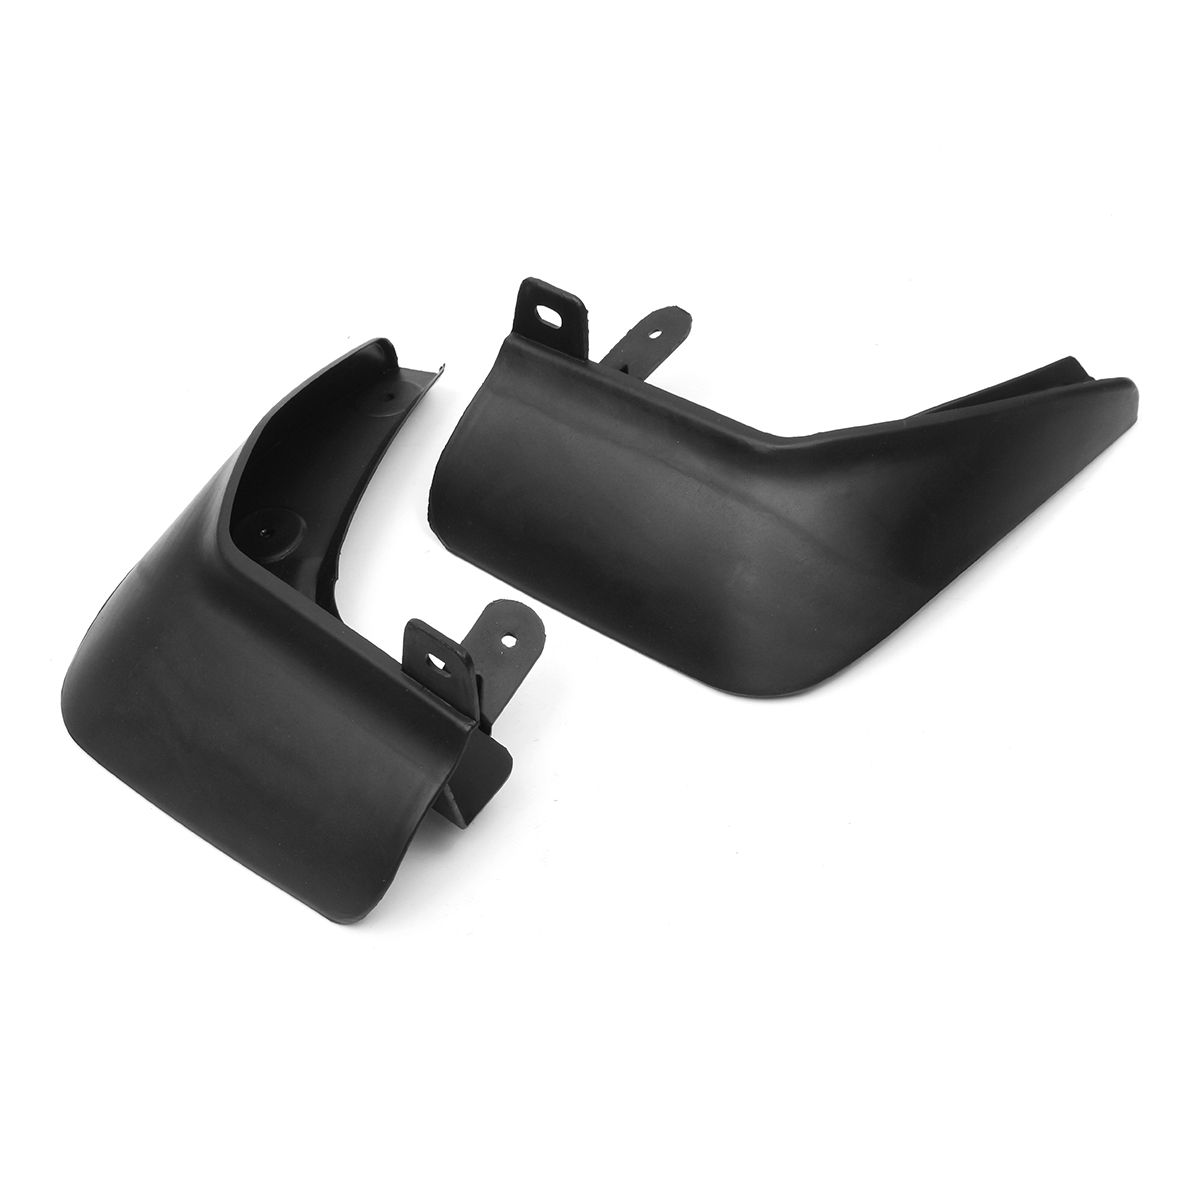 Car-Front-And-Rear-Mud-Flaps-Car-Mudguards-For-Kia-Cerato-Spectra-2007-2009-1388906